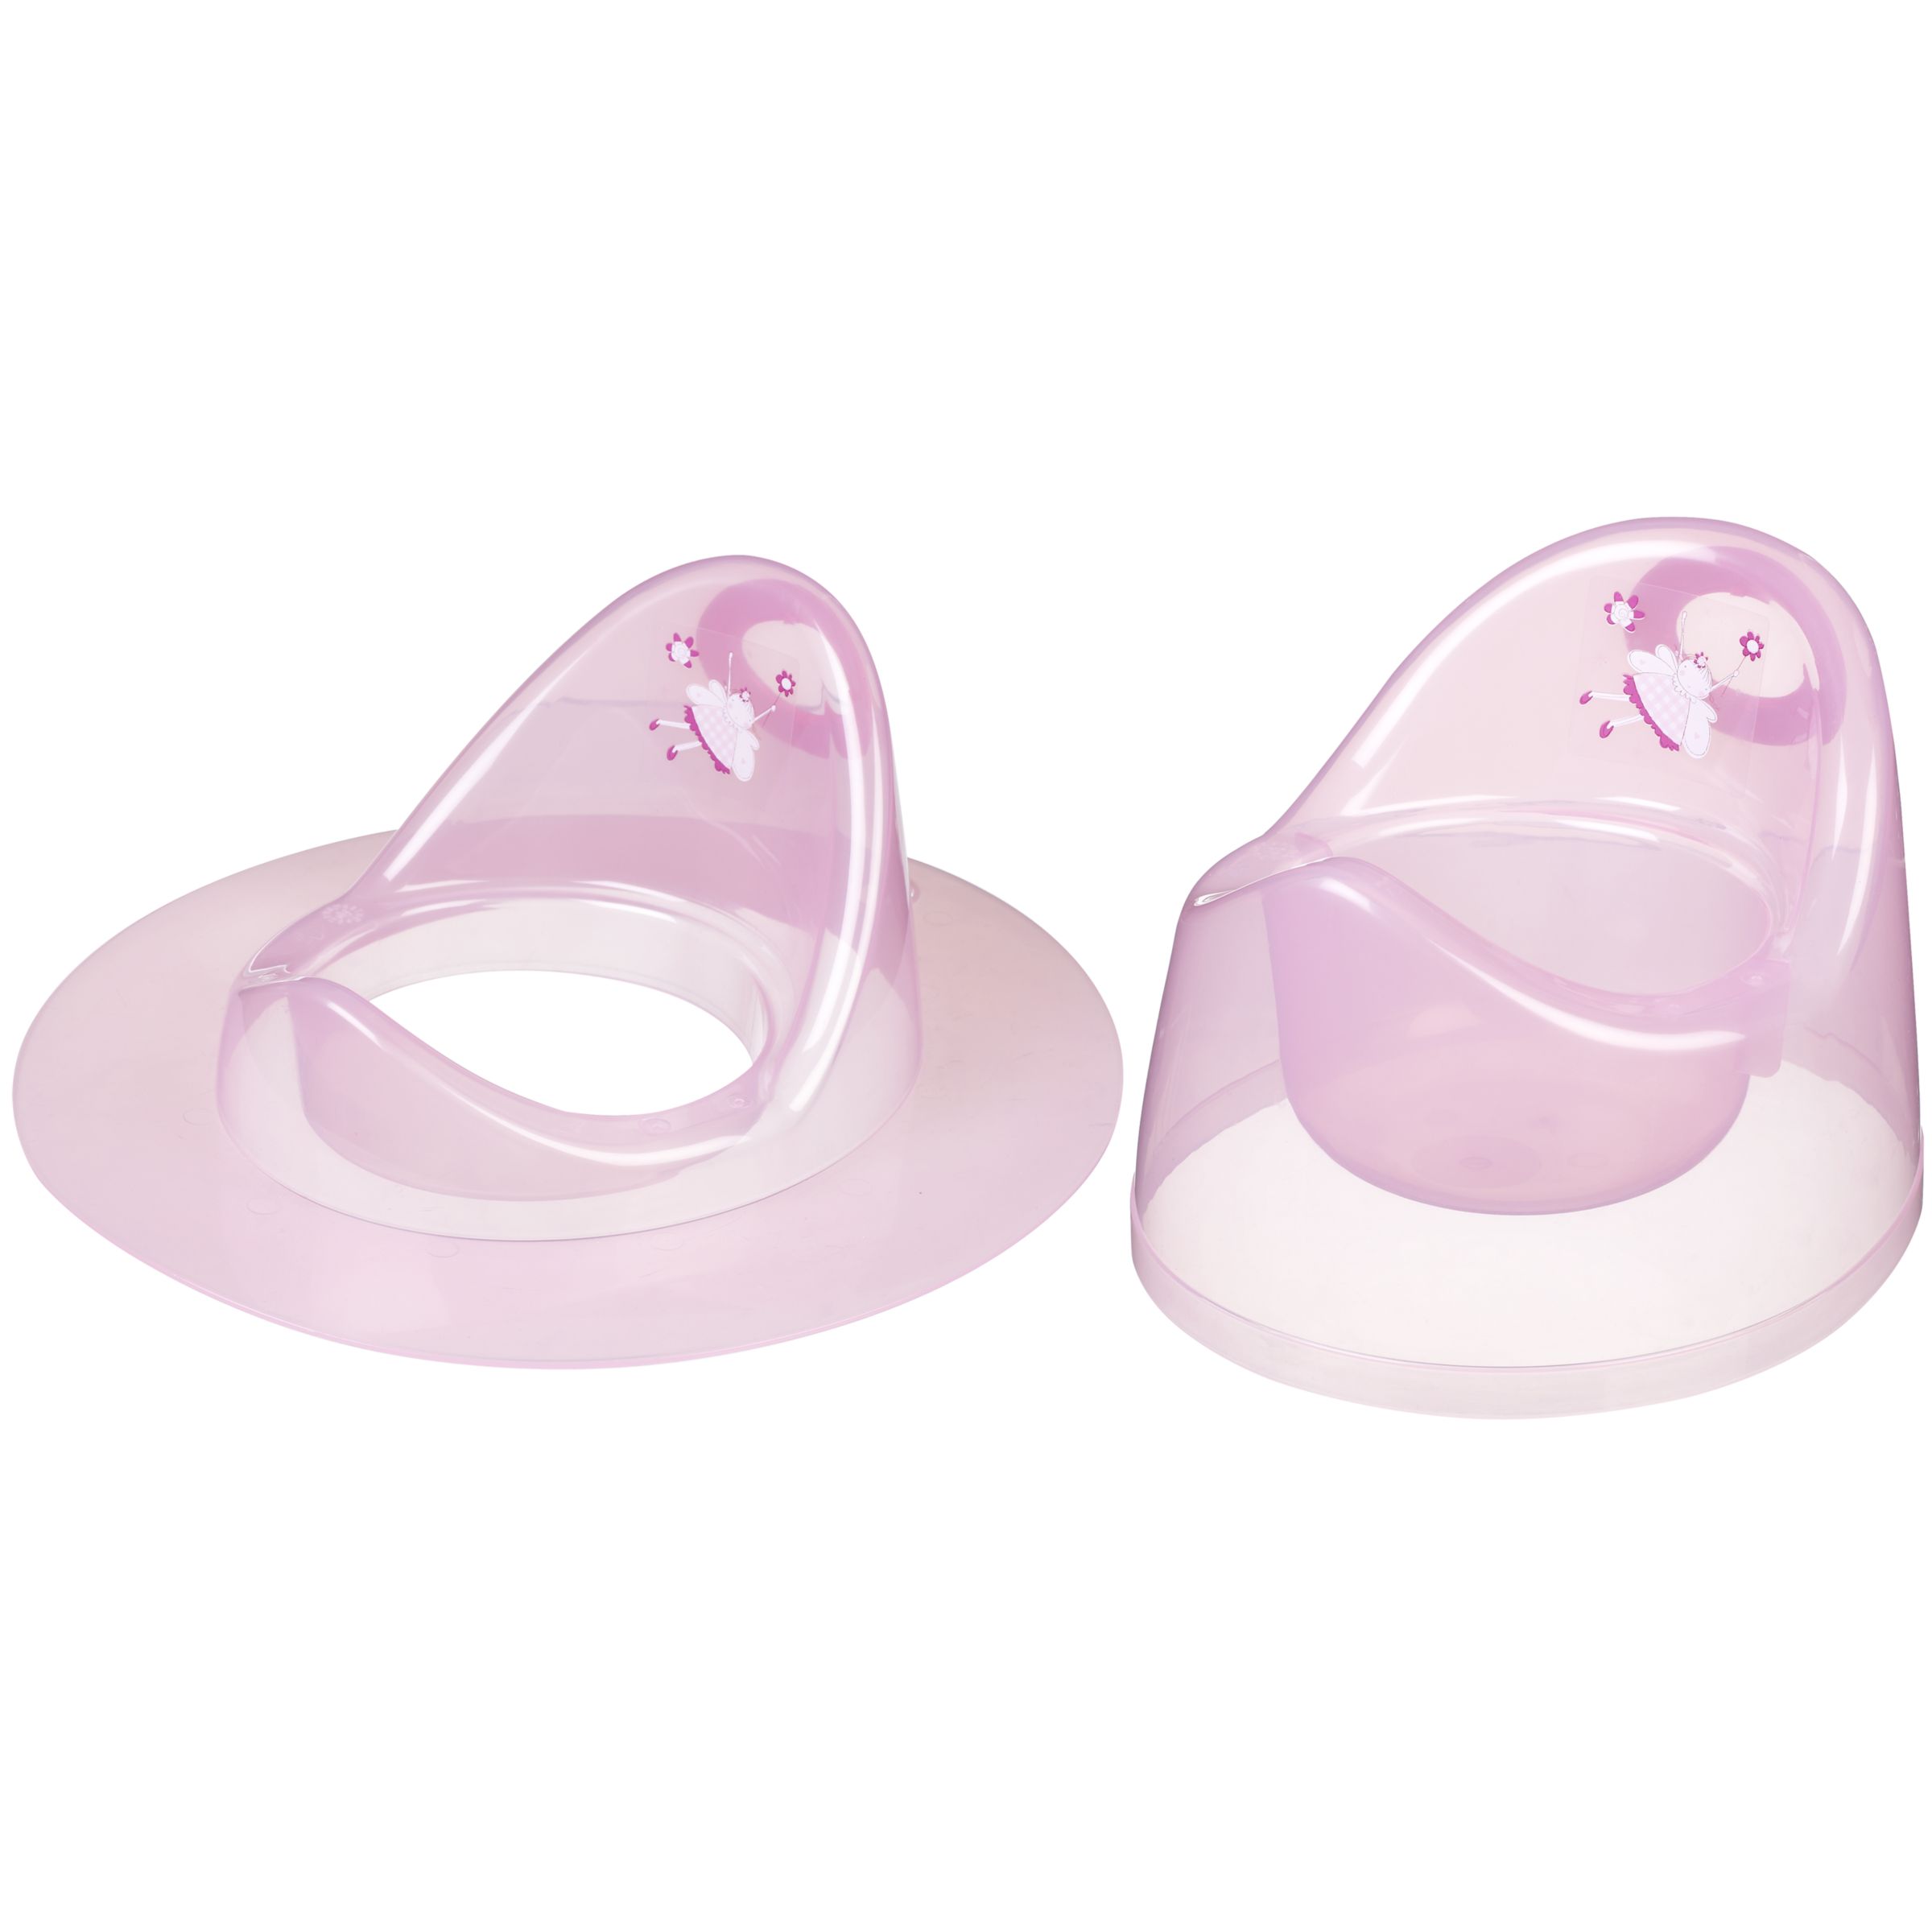 John Lewis Twinkle Twinkle Potty and Toilet Seat